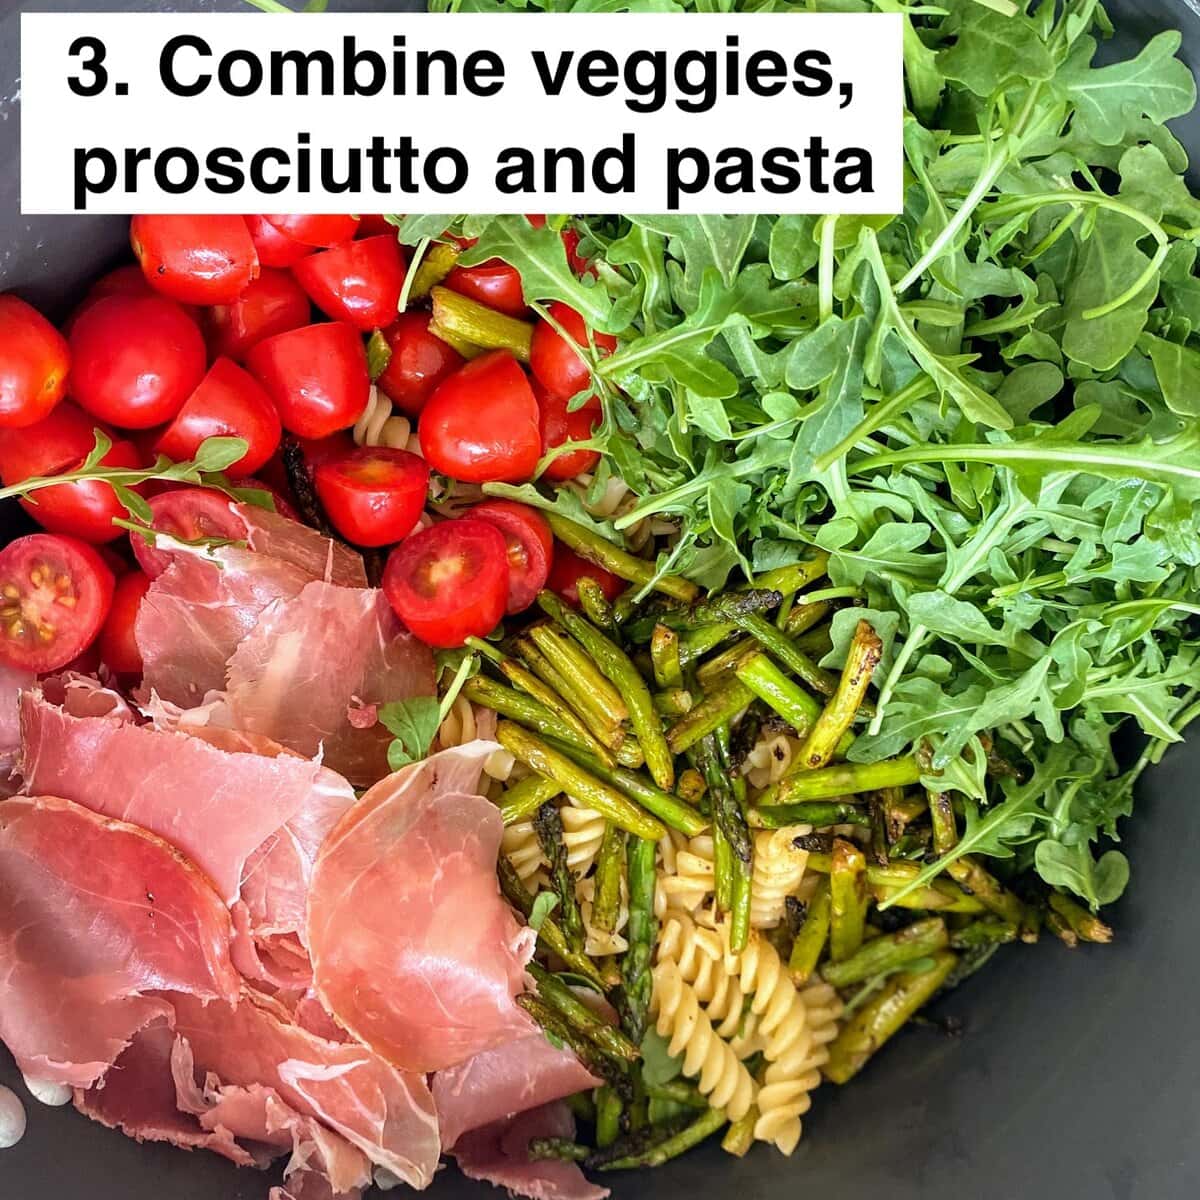 mixing veggies with prosciutto and pasta